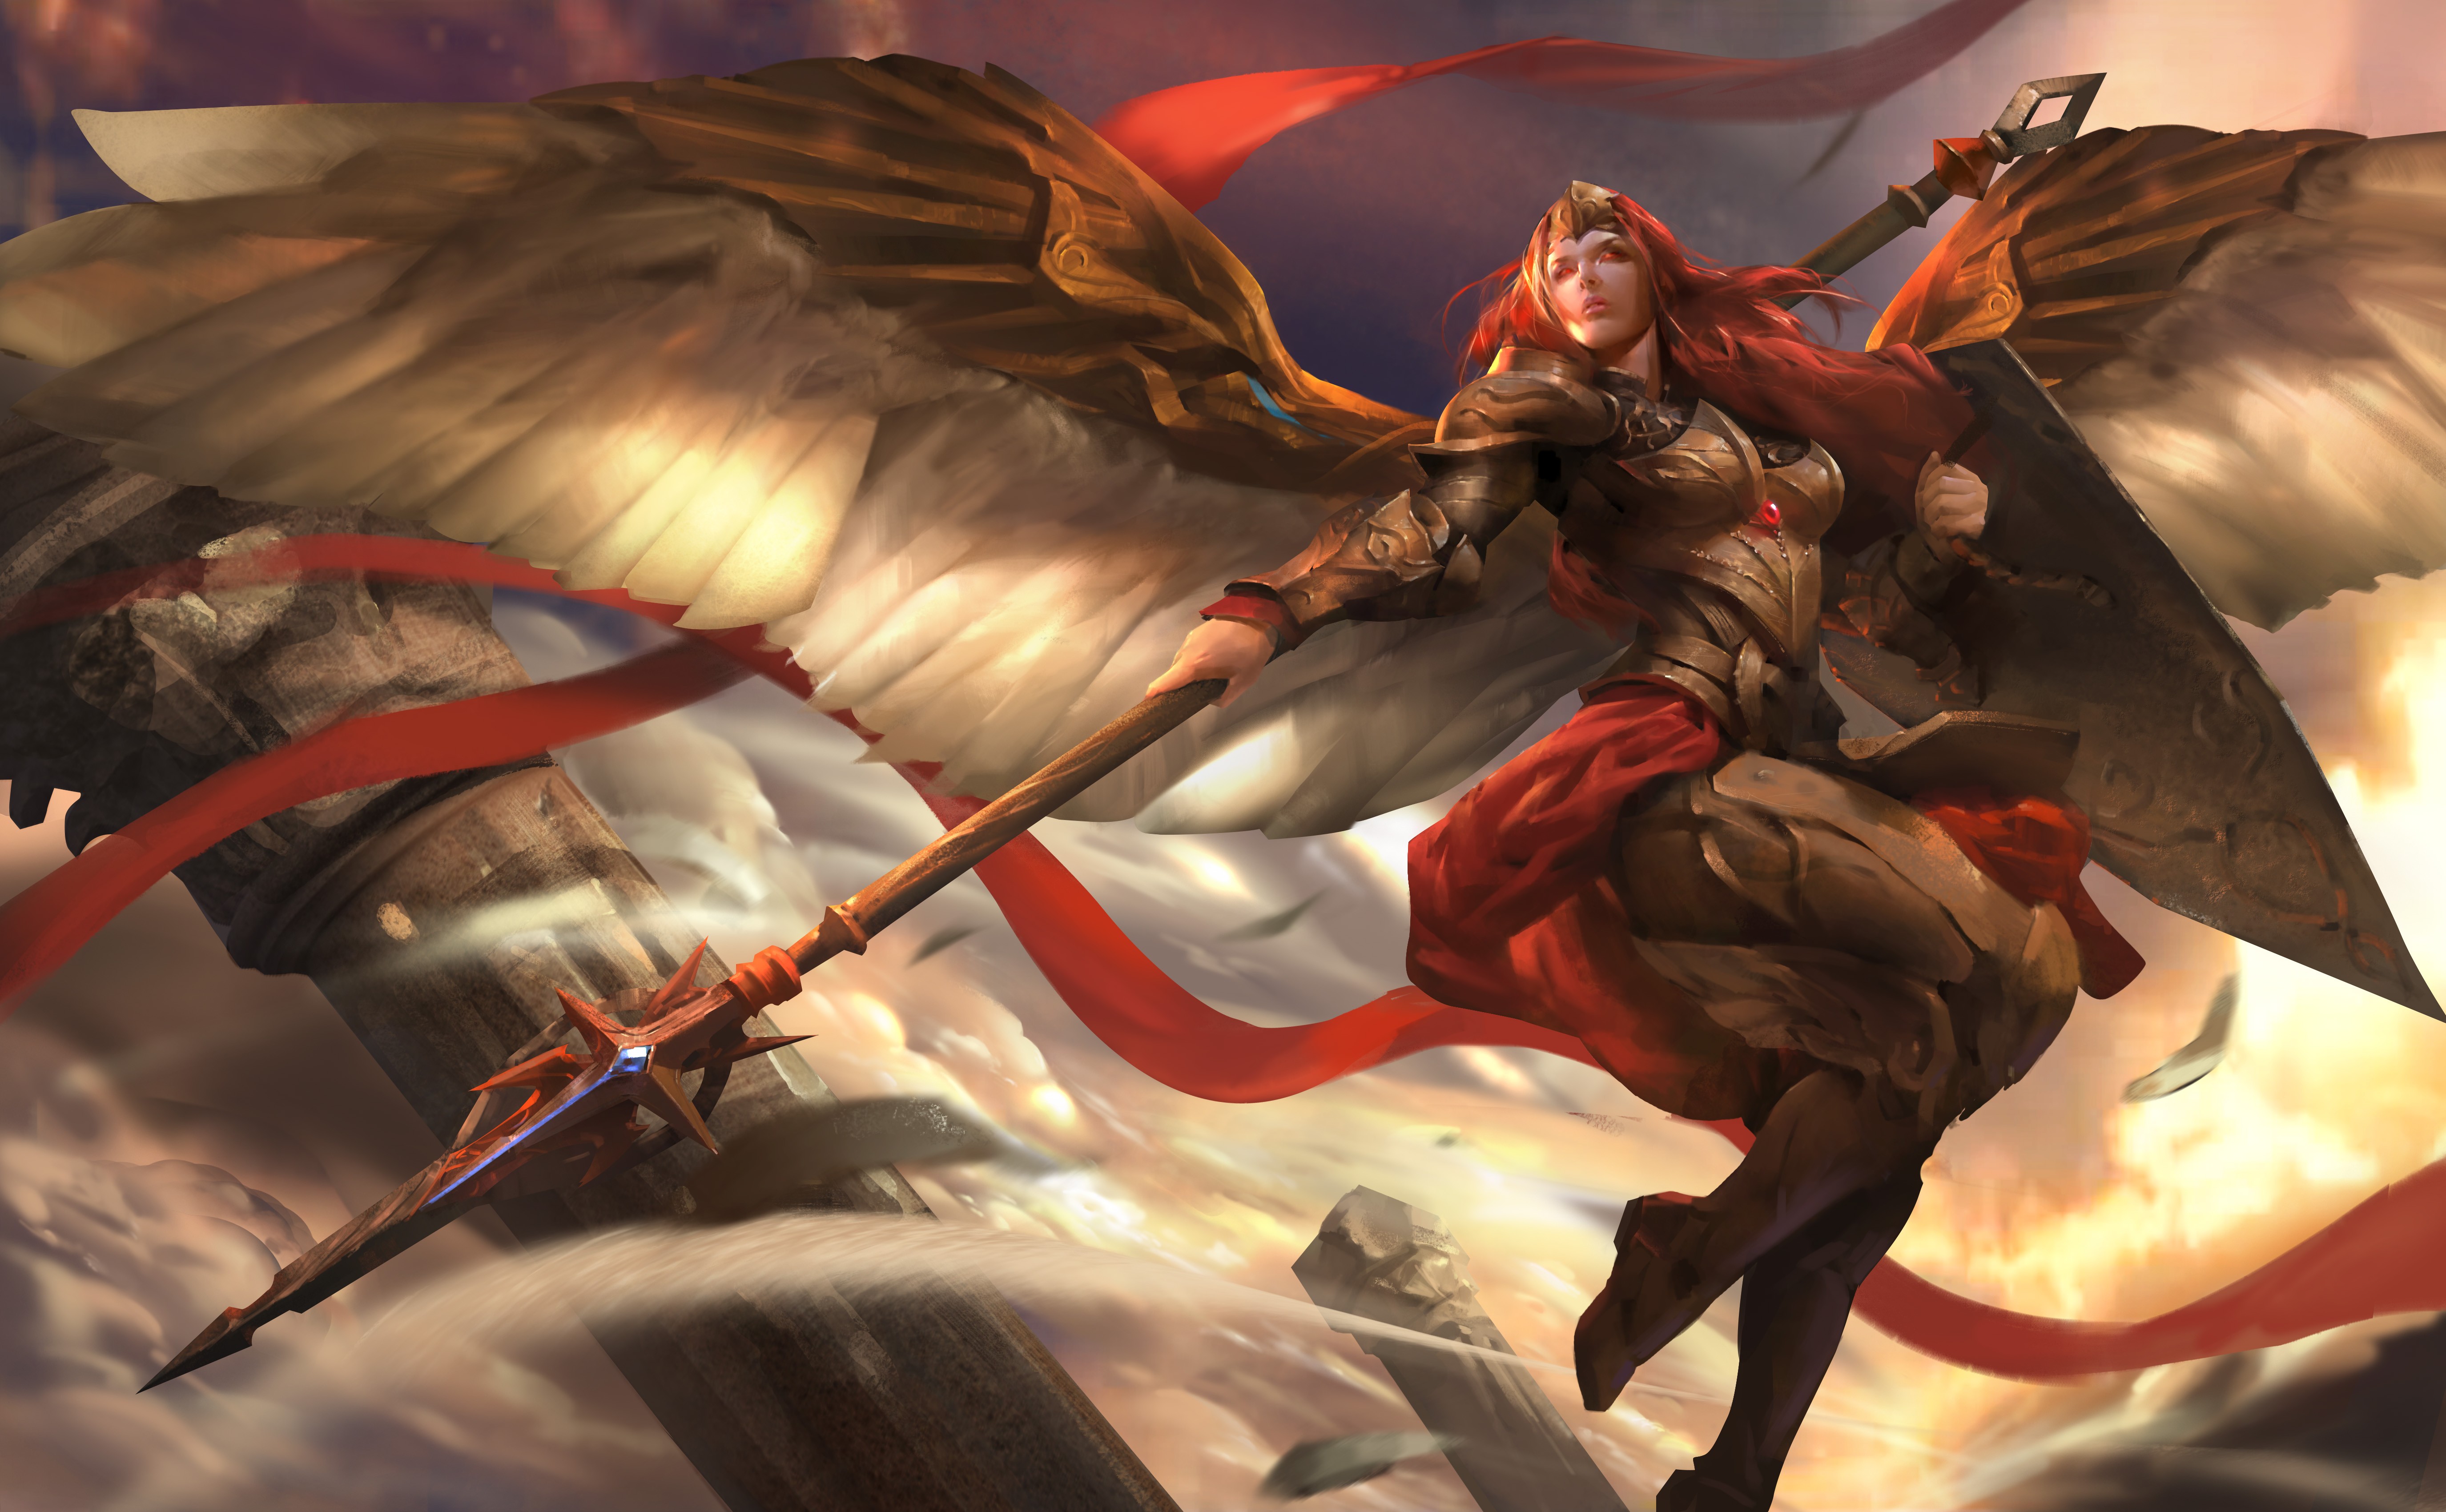 General 5500x3400 Heroes of Newerth video games fantasy art PC gaming fantasy girl spear girls with guns armor fantasy armor wings